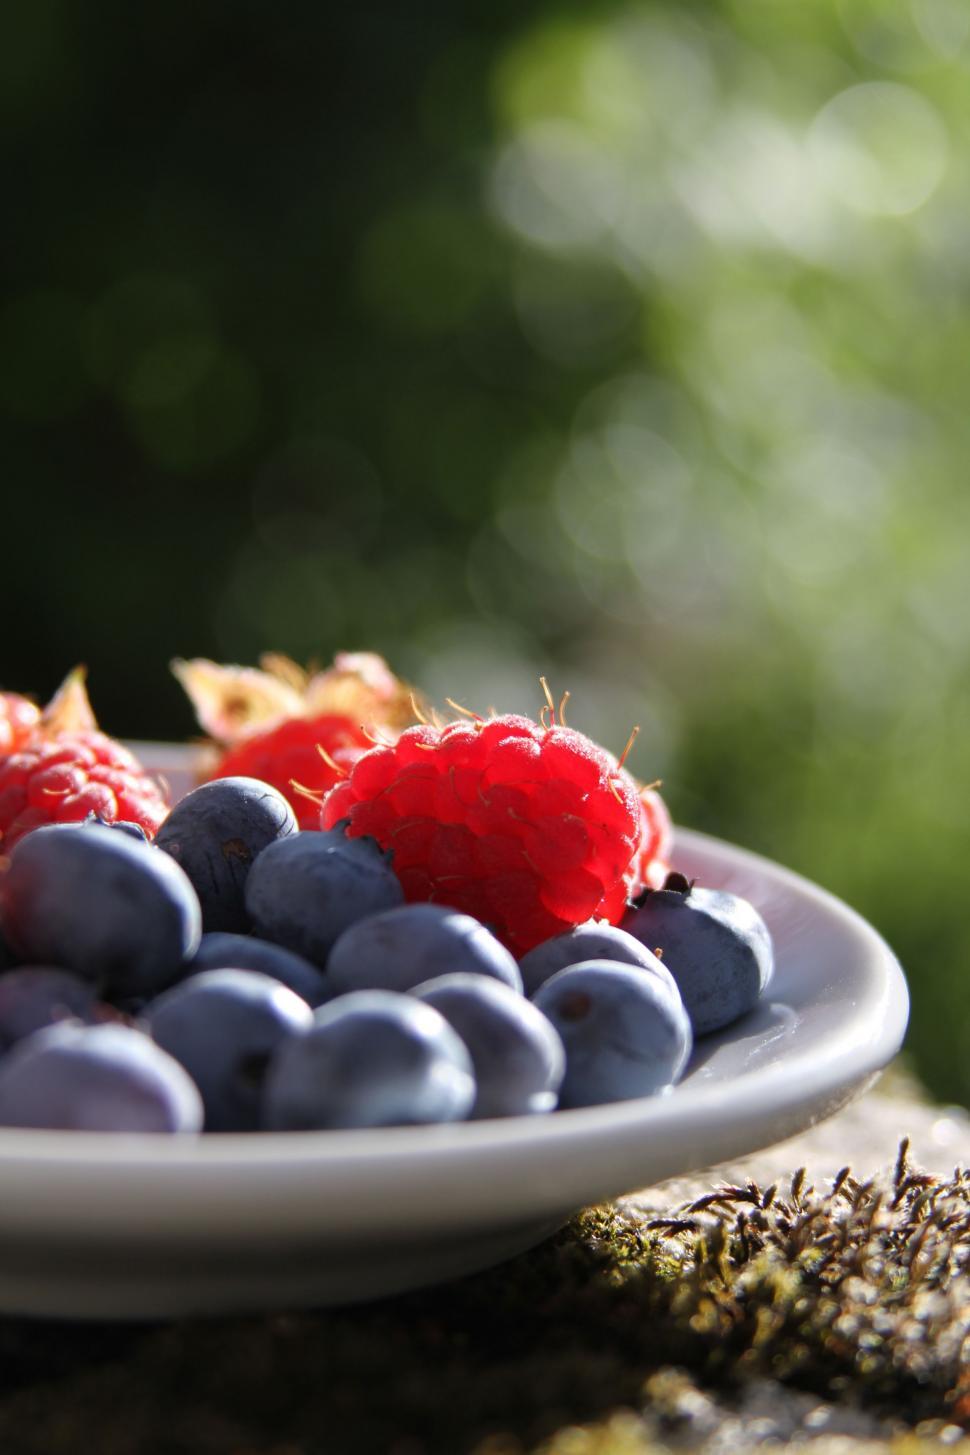 Free Image of Plate of Blueberries and Raspberries on Table 